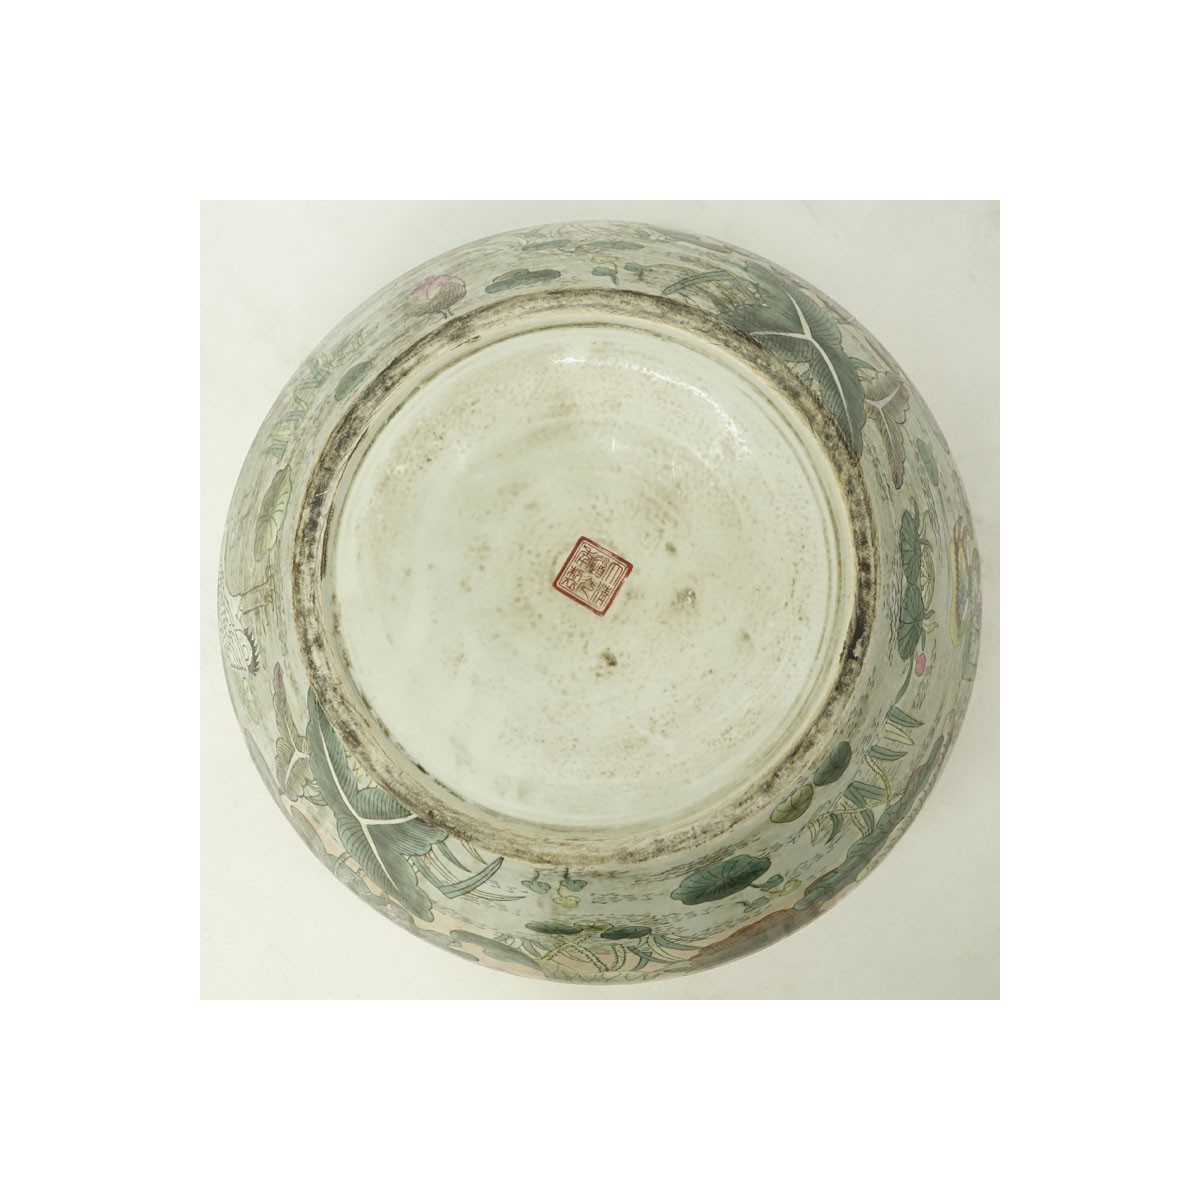 20th Century Chinese  Porcelain Jardinière. Depicts a enamel floral painted pond scene with water l